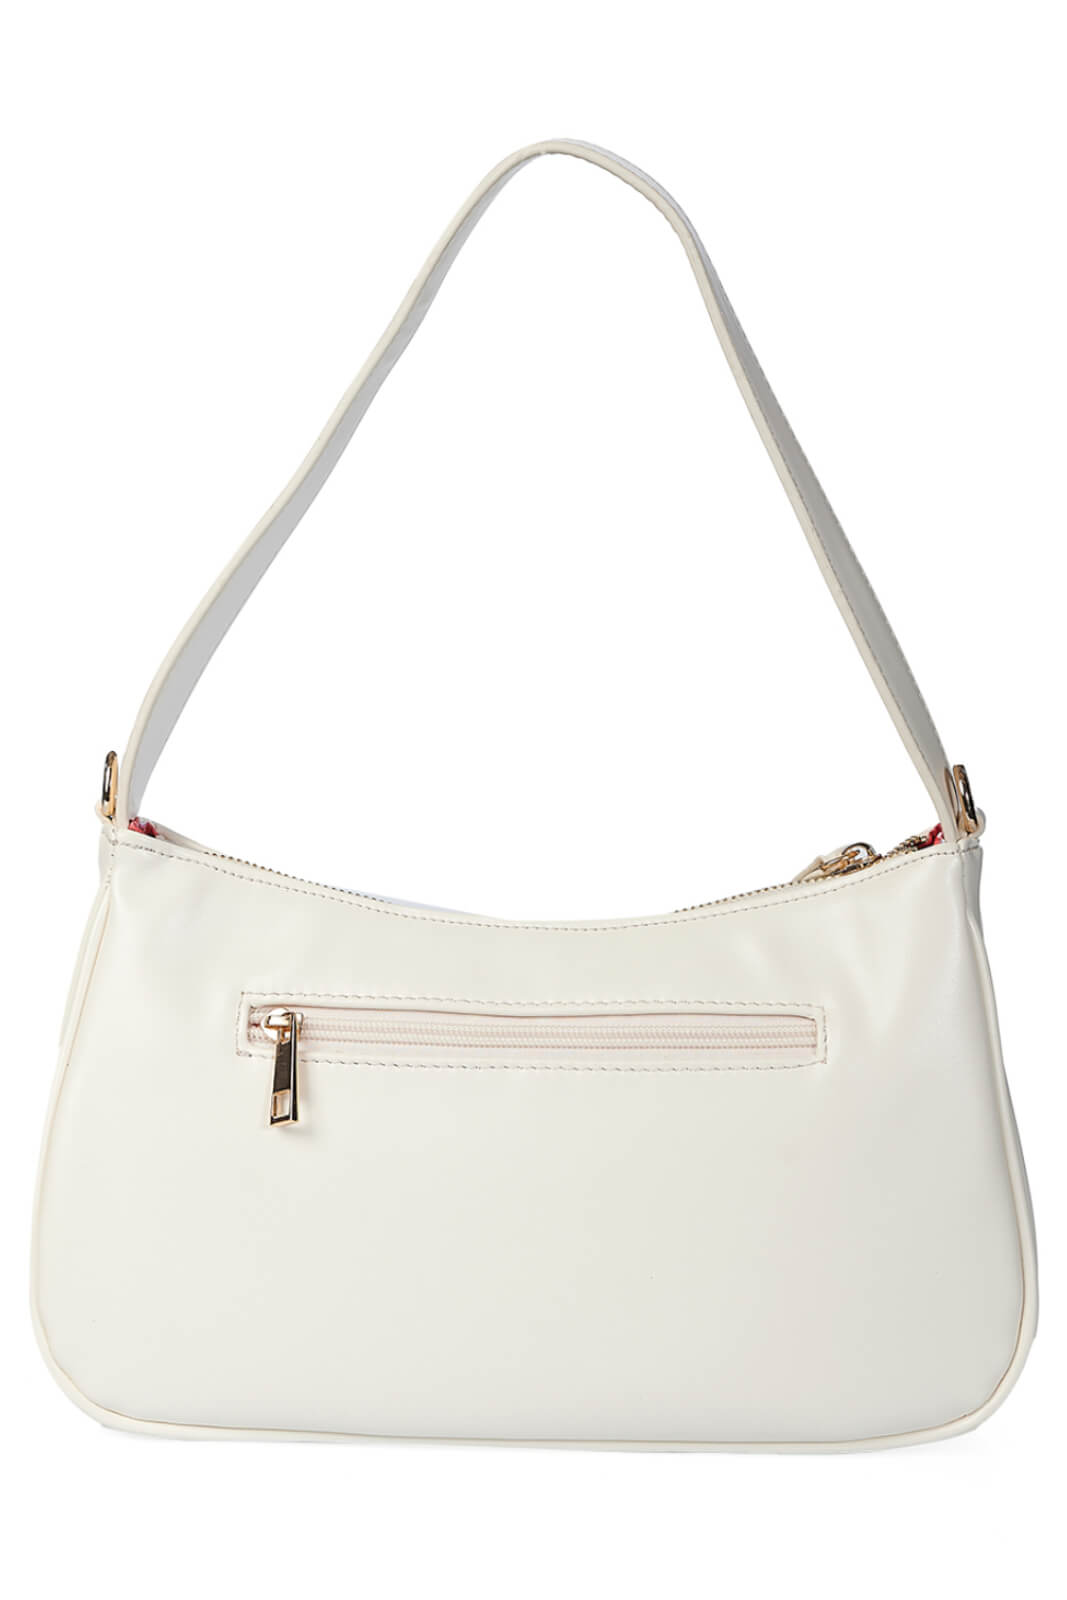 Banned Wild Cherry Embroidered Shoulder Bag, White, One-Size